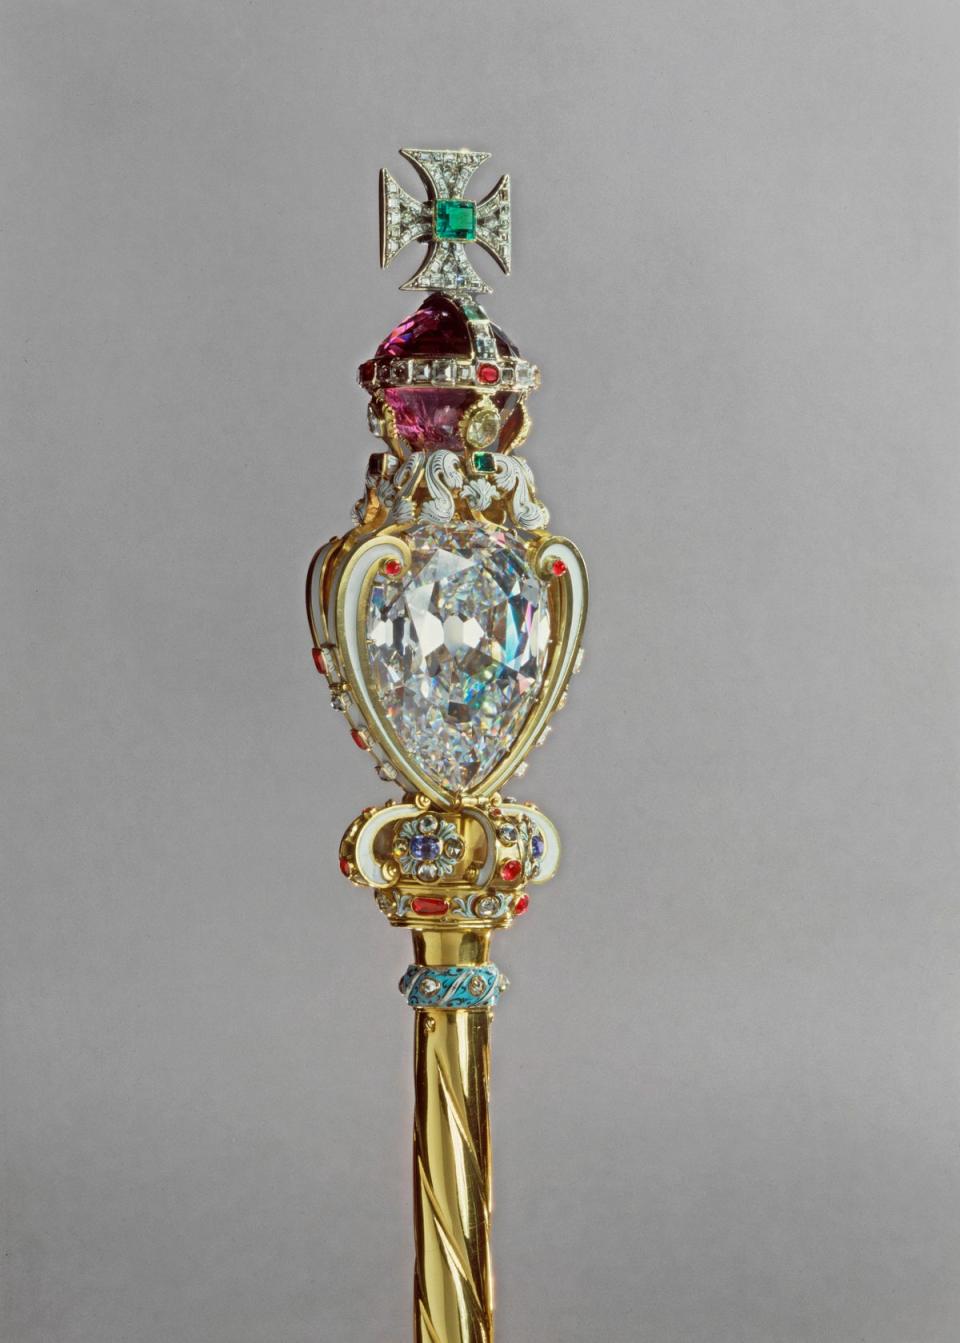 Handout photo issued by Buckingham Palace of the Sovereign’s Sceptre with Cross which will feature during the Coronation of King Charles III at Westminster Abbey (PA)